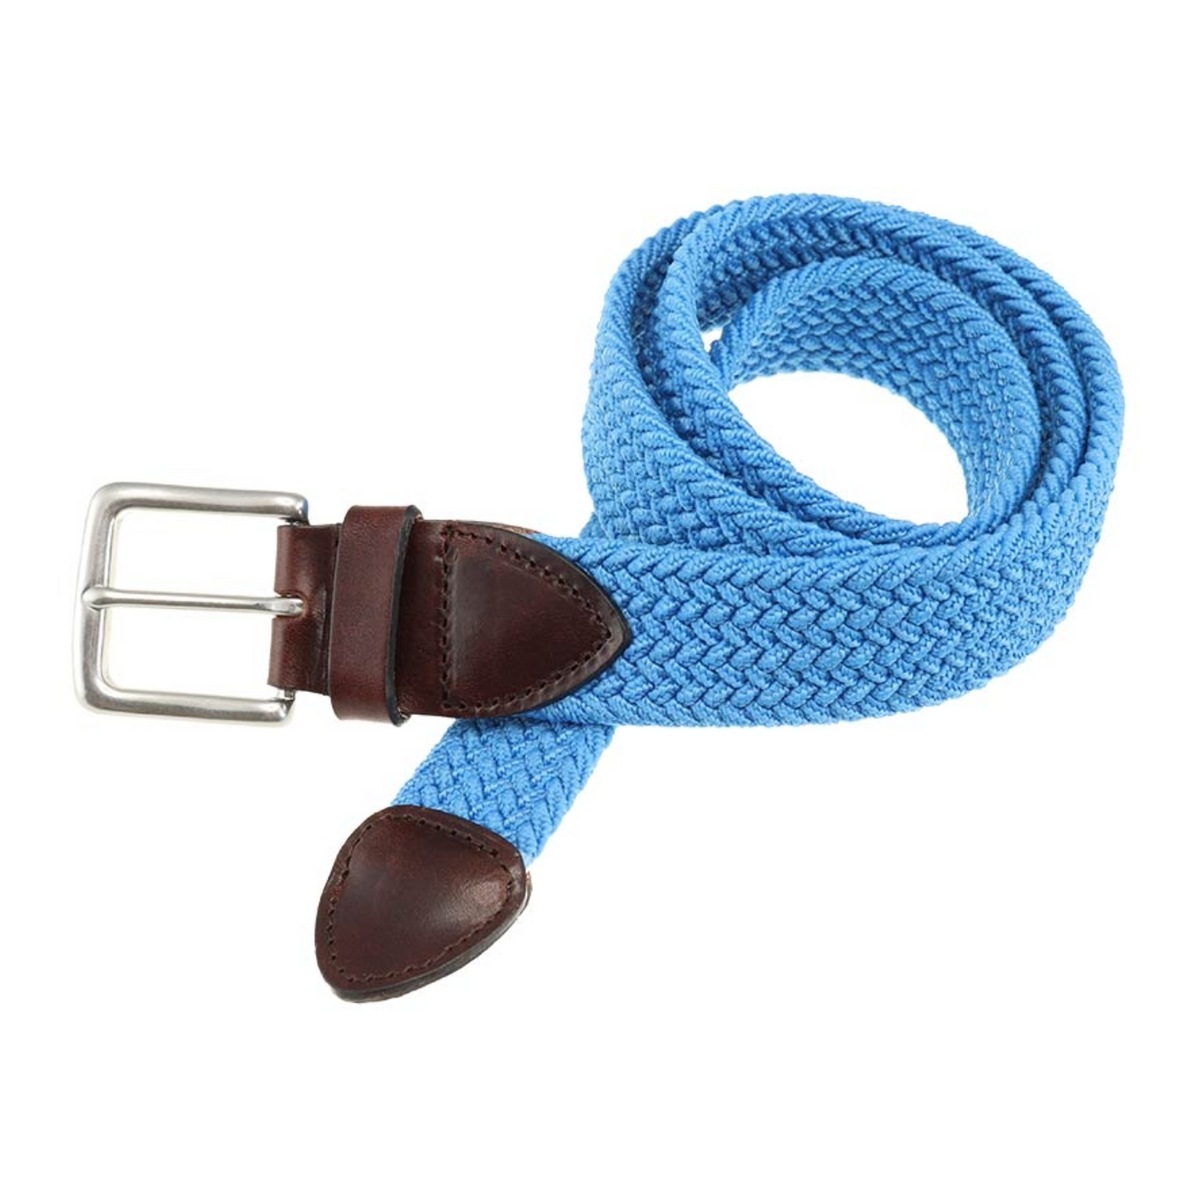 Crafted to add a rich style to any look, our Haspel x T.B. Phelps Collaboration, the Blue Braided Belt features a Briar Waxy leather tab, antique nickel finish buckle, and four color choices of braided elastic.   Braided elastic  •  Briar Waxy Leather Points  •  1-3/8&quot; wide  •  Antique Nickel Finish Buckle  •  Available in Blue, White, Navy or Black  •  Imported  •  Always order belts one size above your natural waist size.  •  Return Policy